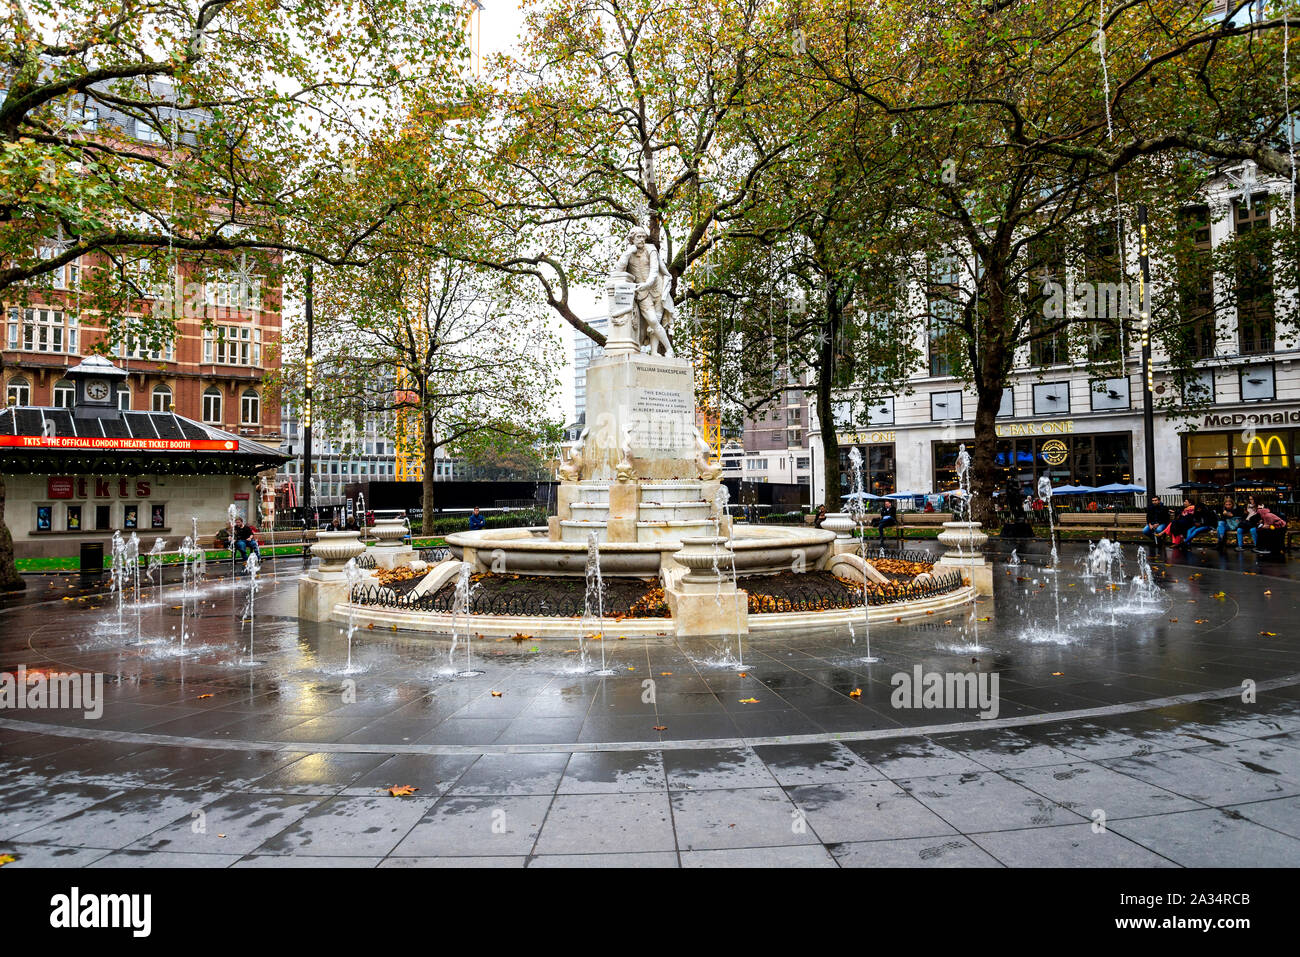 A statue of William Shakespeare and small fountain on Leicester Square in London, United Kingdom Stock Photo